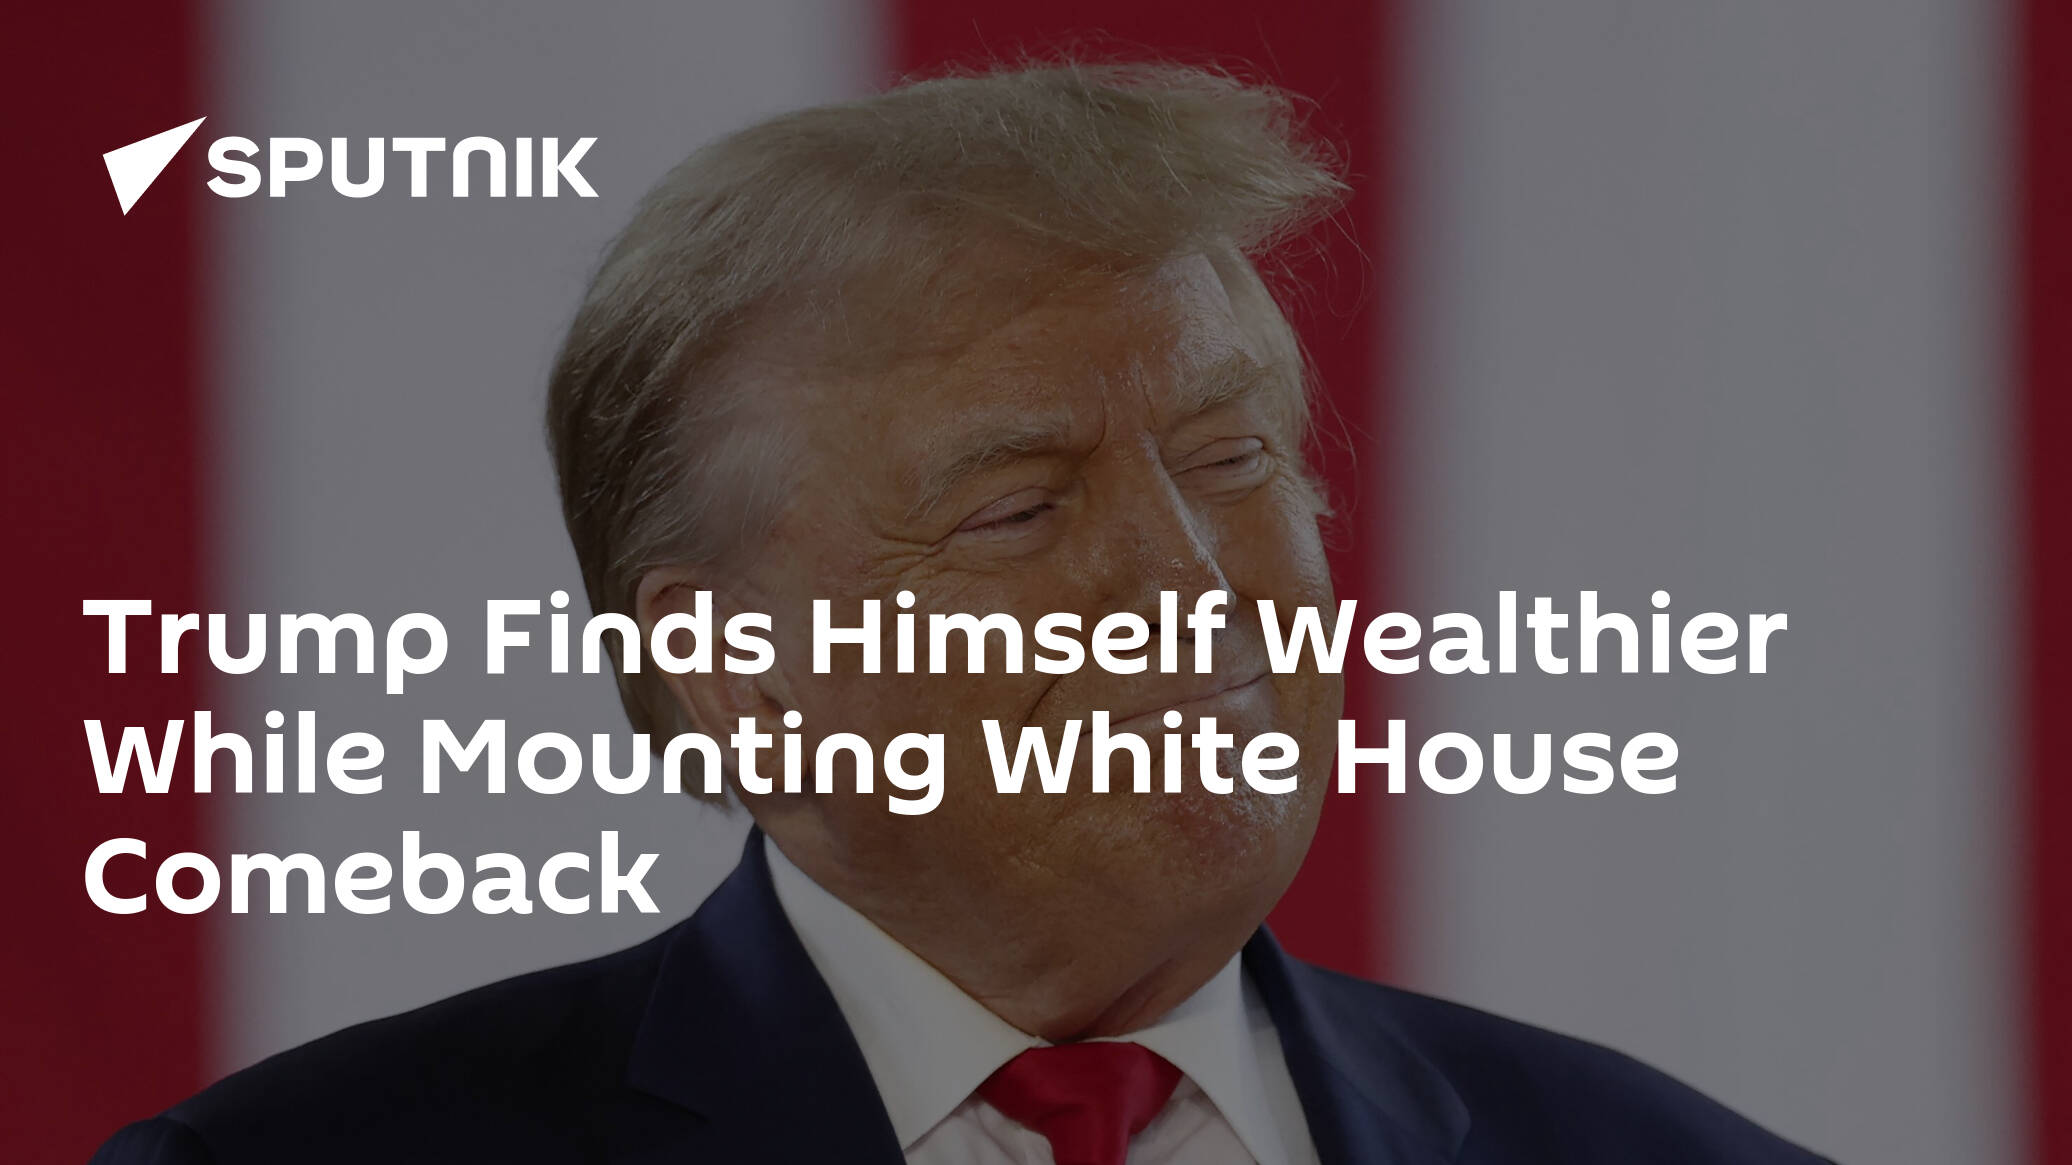 Trump Finds Himself Wealthier While Mounting White House Comeback